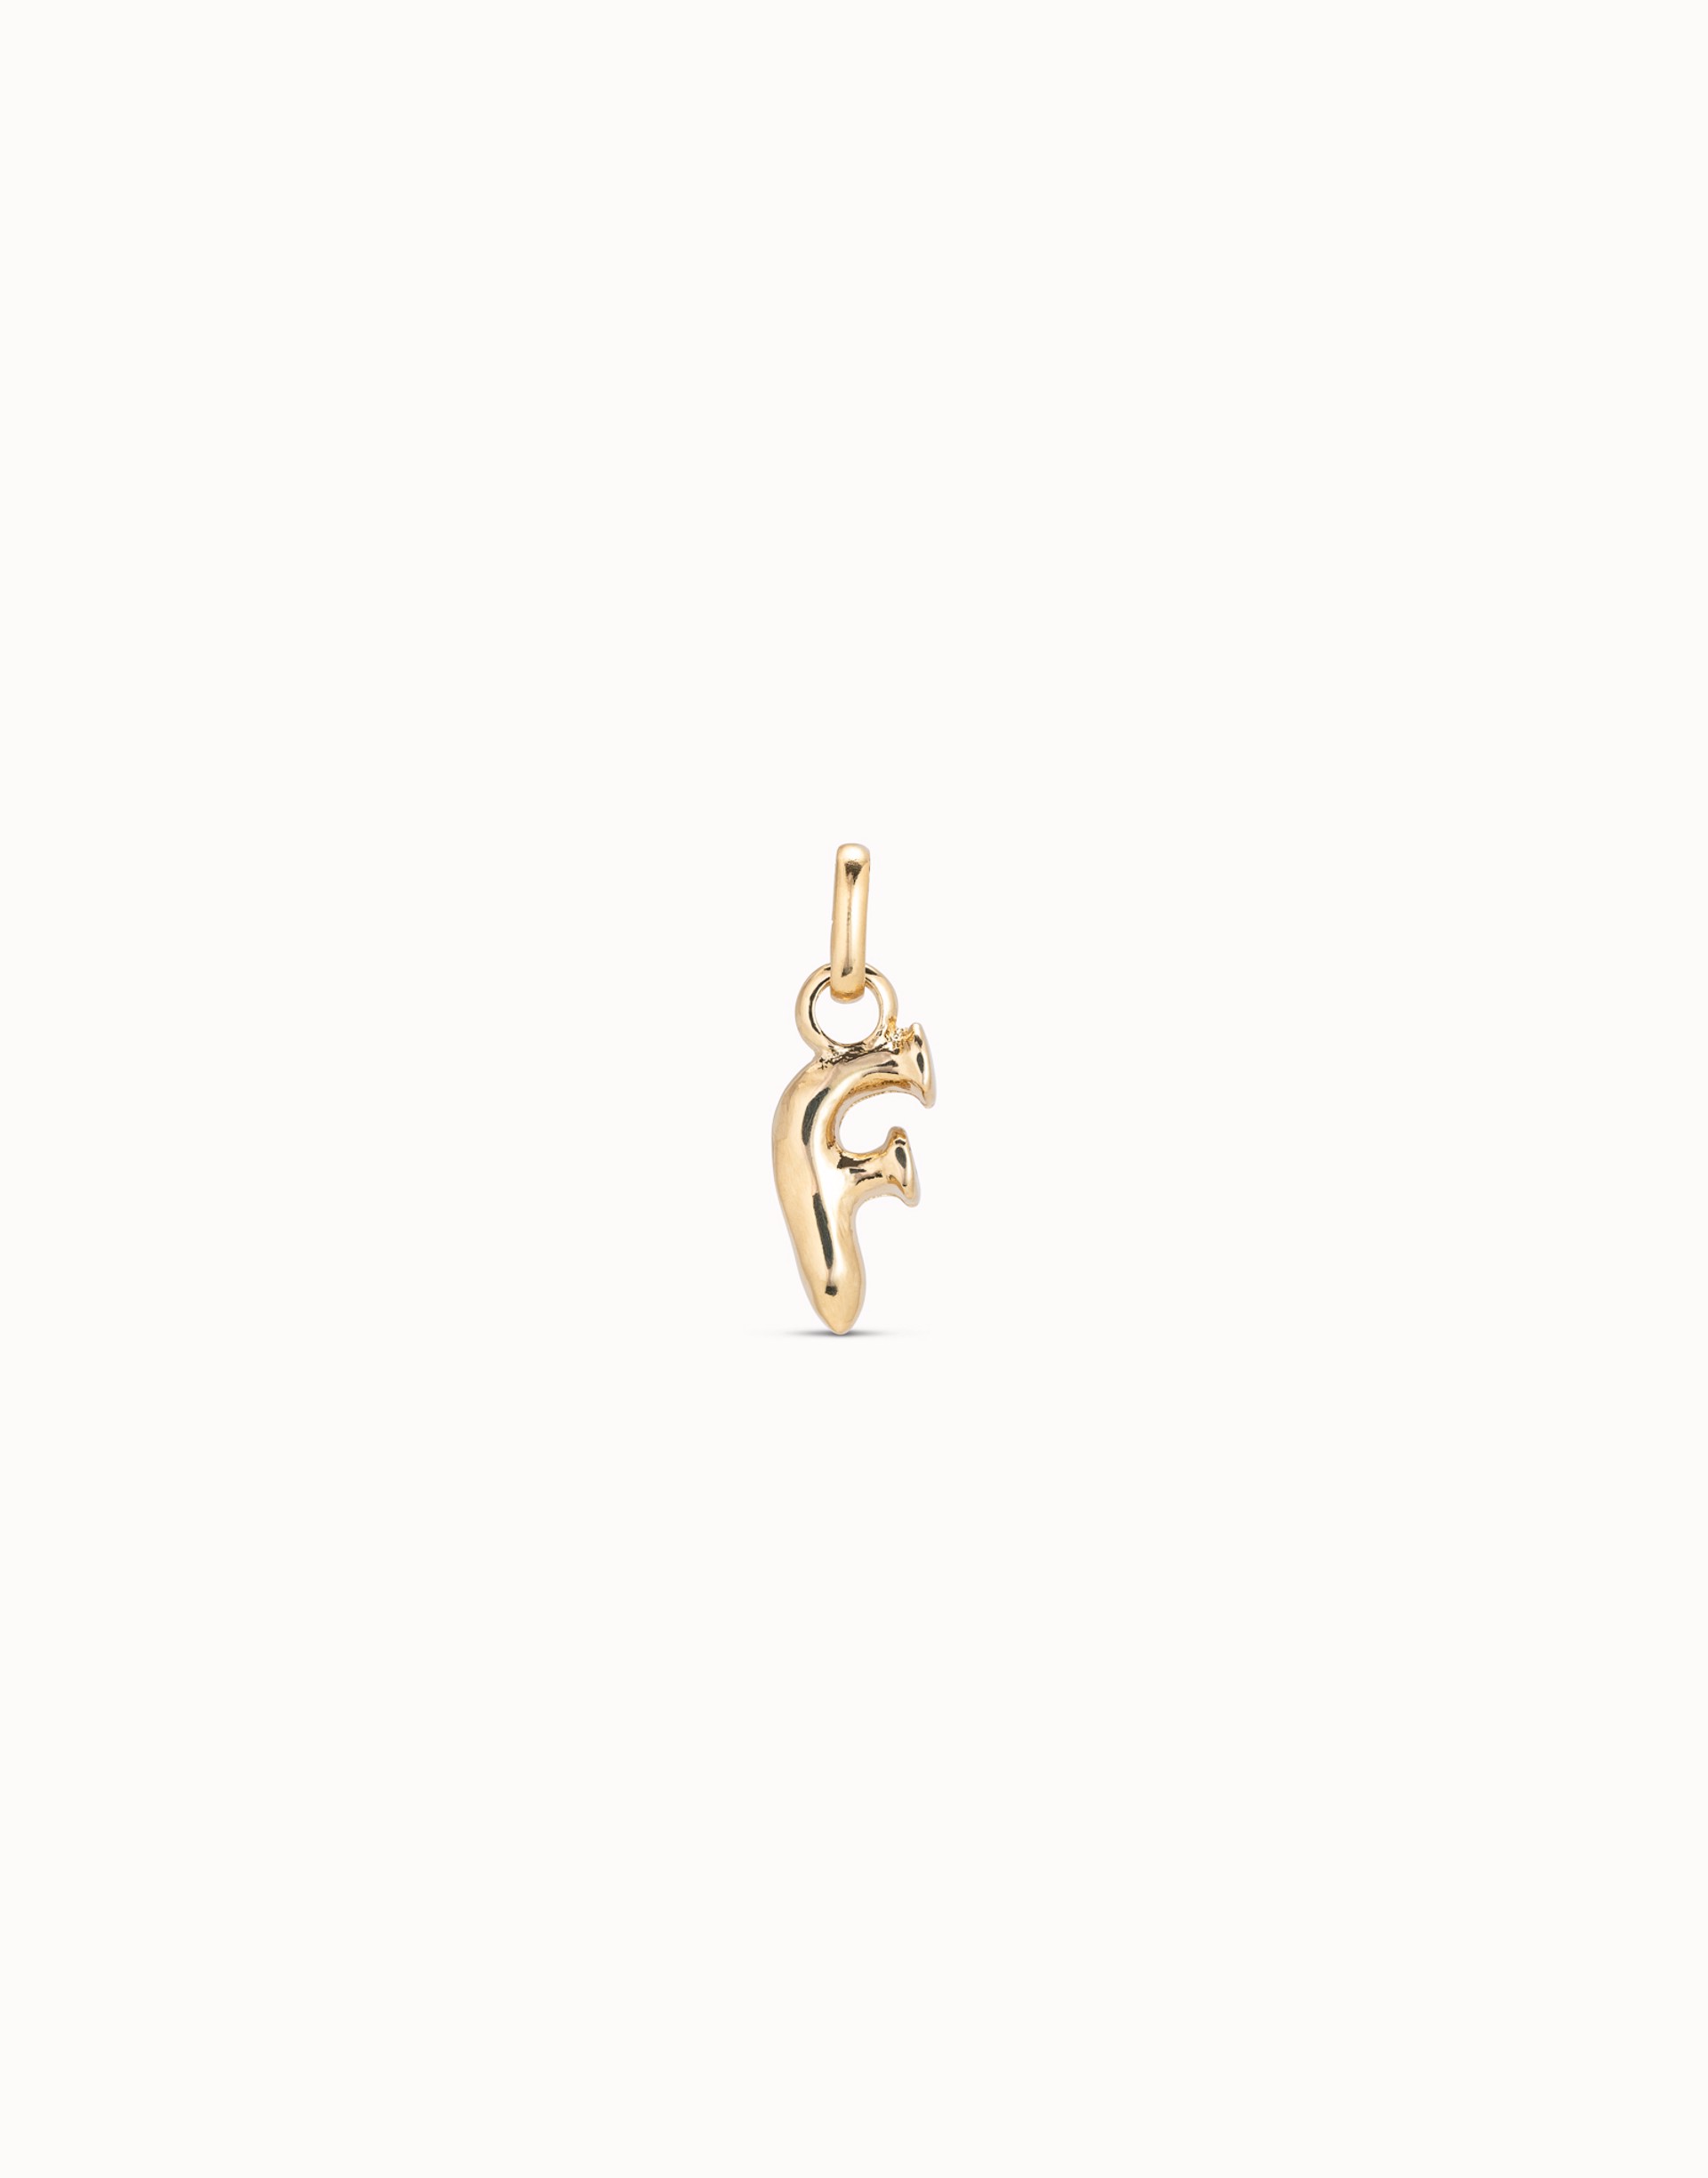 Hang Me Charm Gold (1 inch) by UNO DE 50